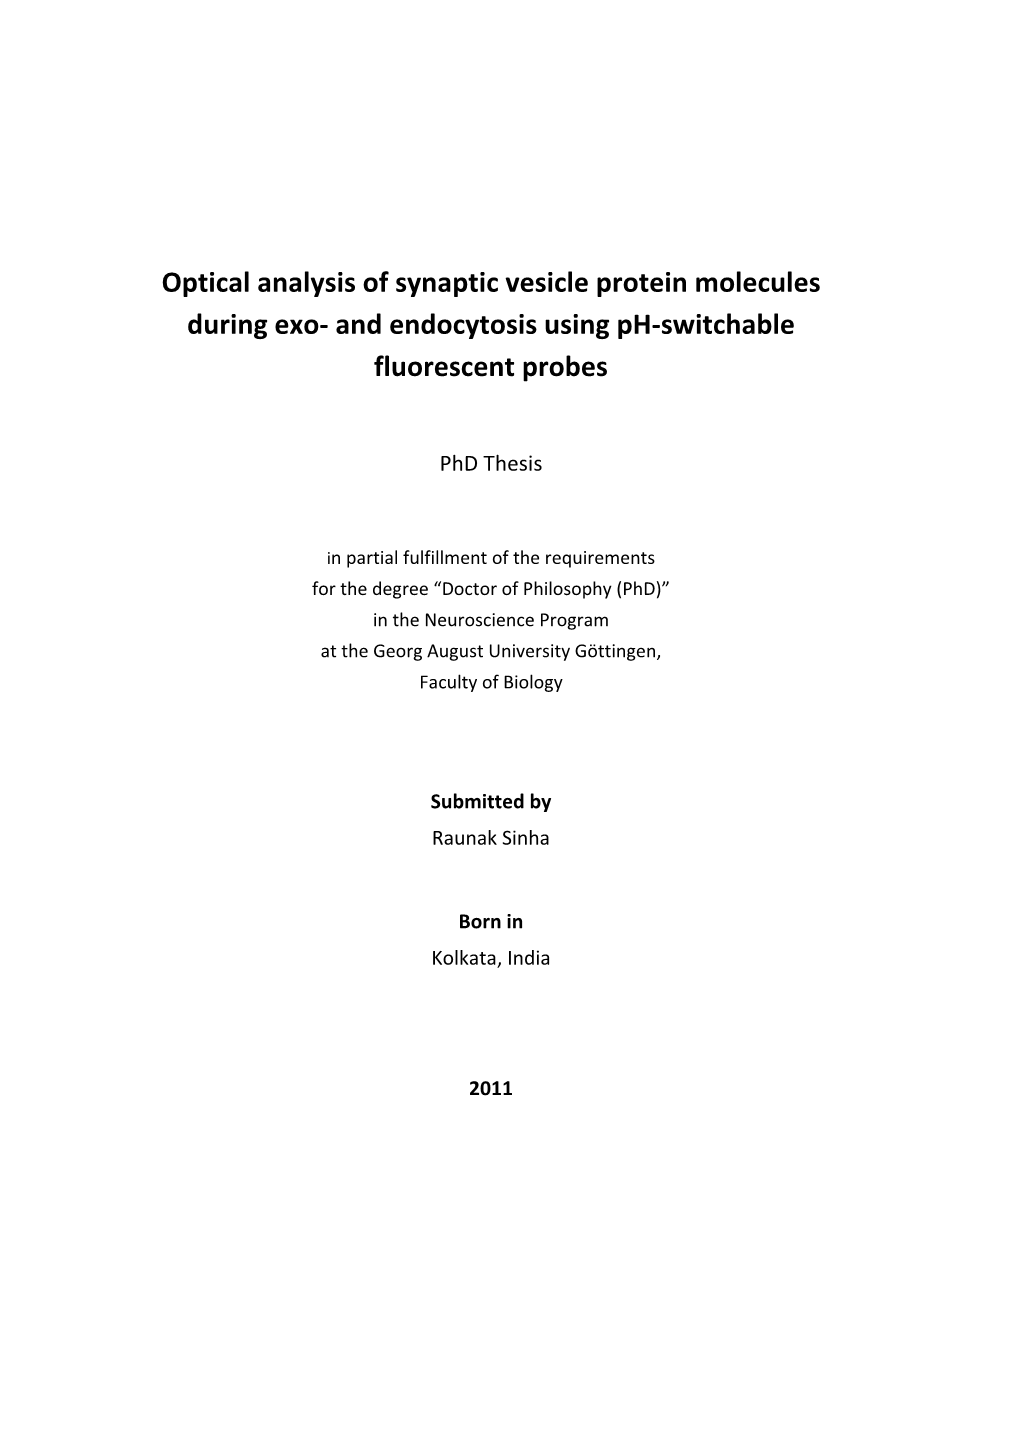 Optical Analysis of Synaptic Vesicle Protein Molecules During Exo- And